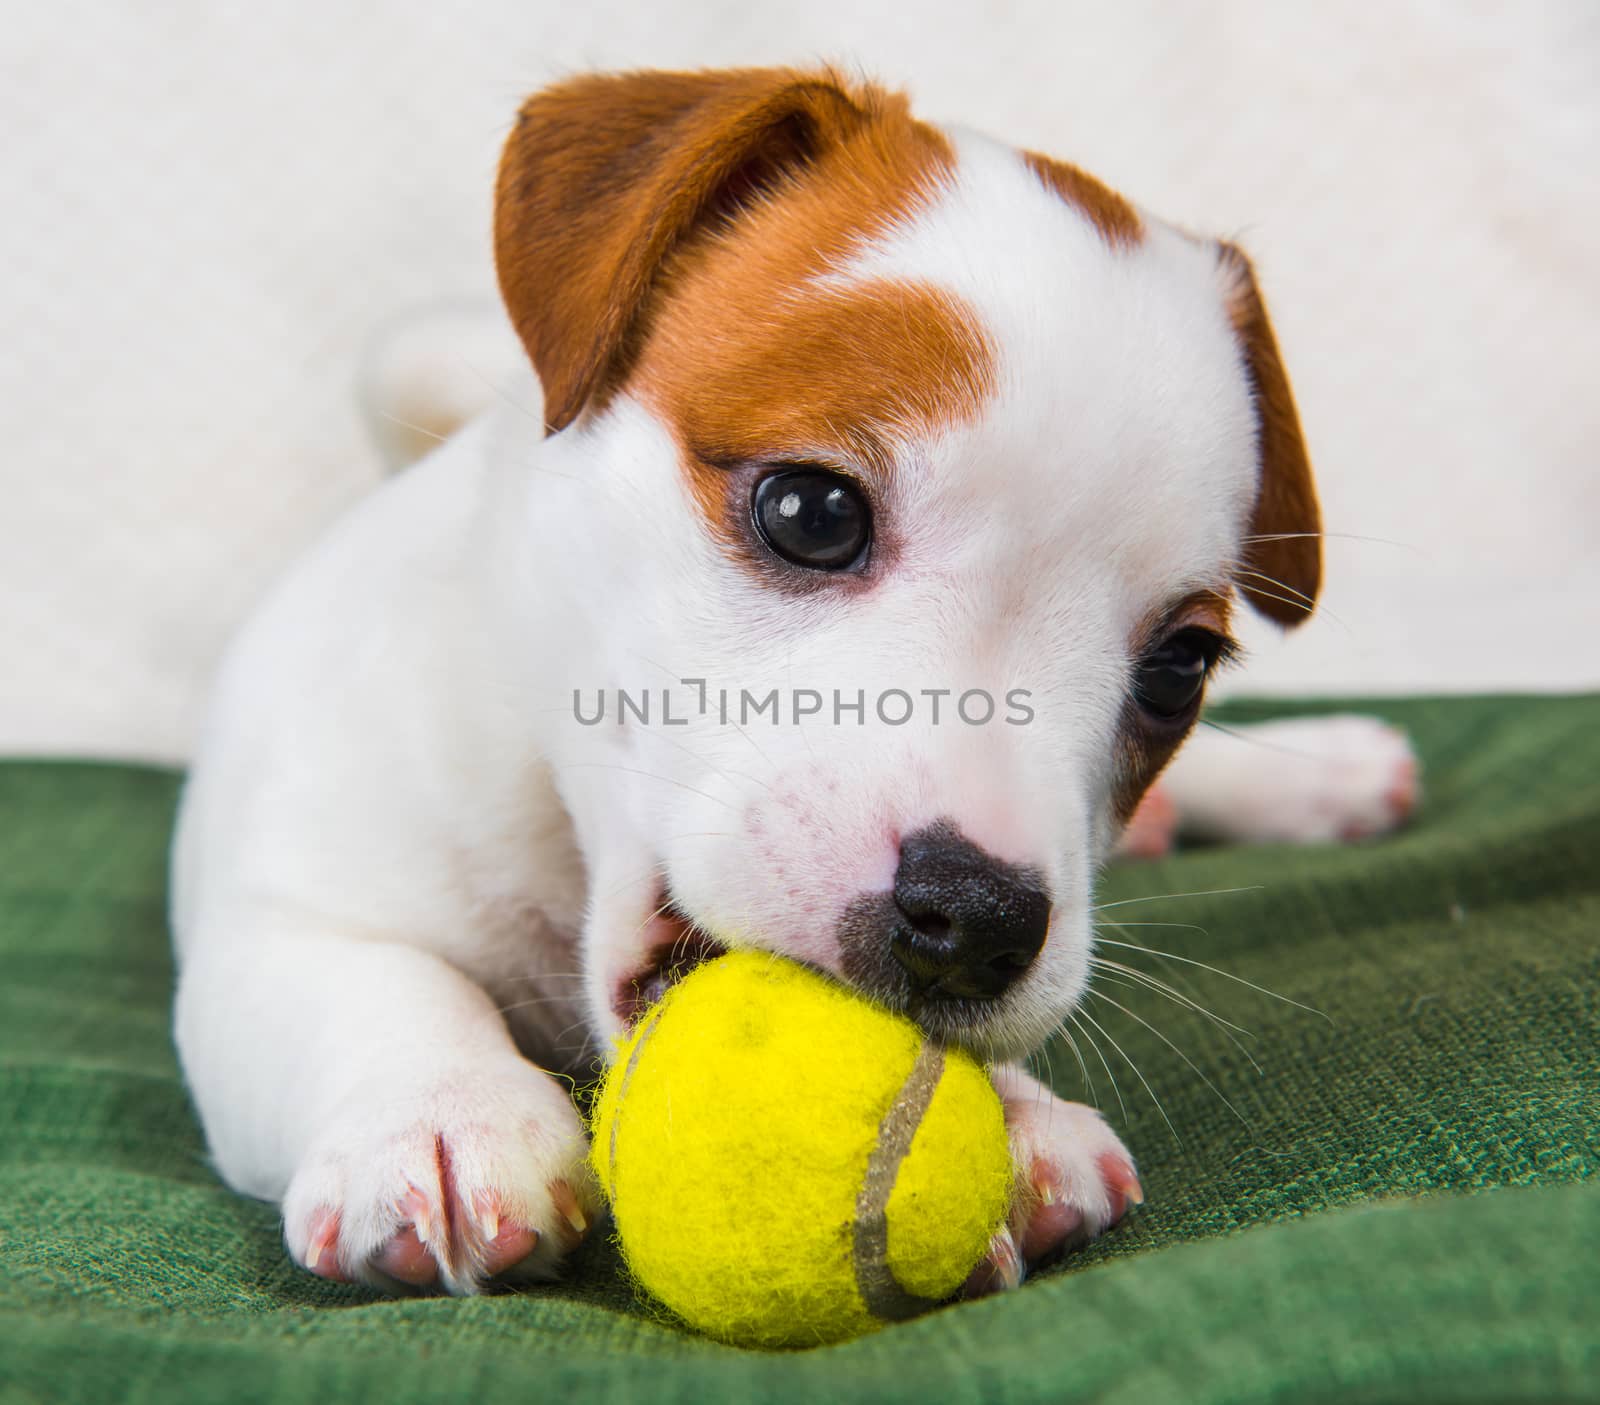 Dog Jack Russel terrier playing with tennis ball. by infinityyy